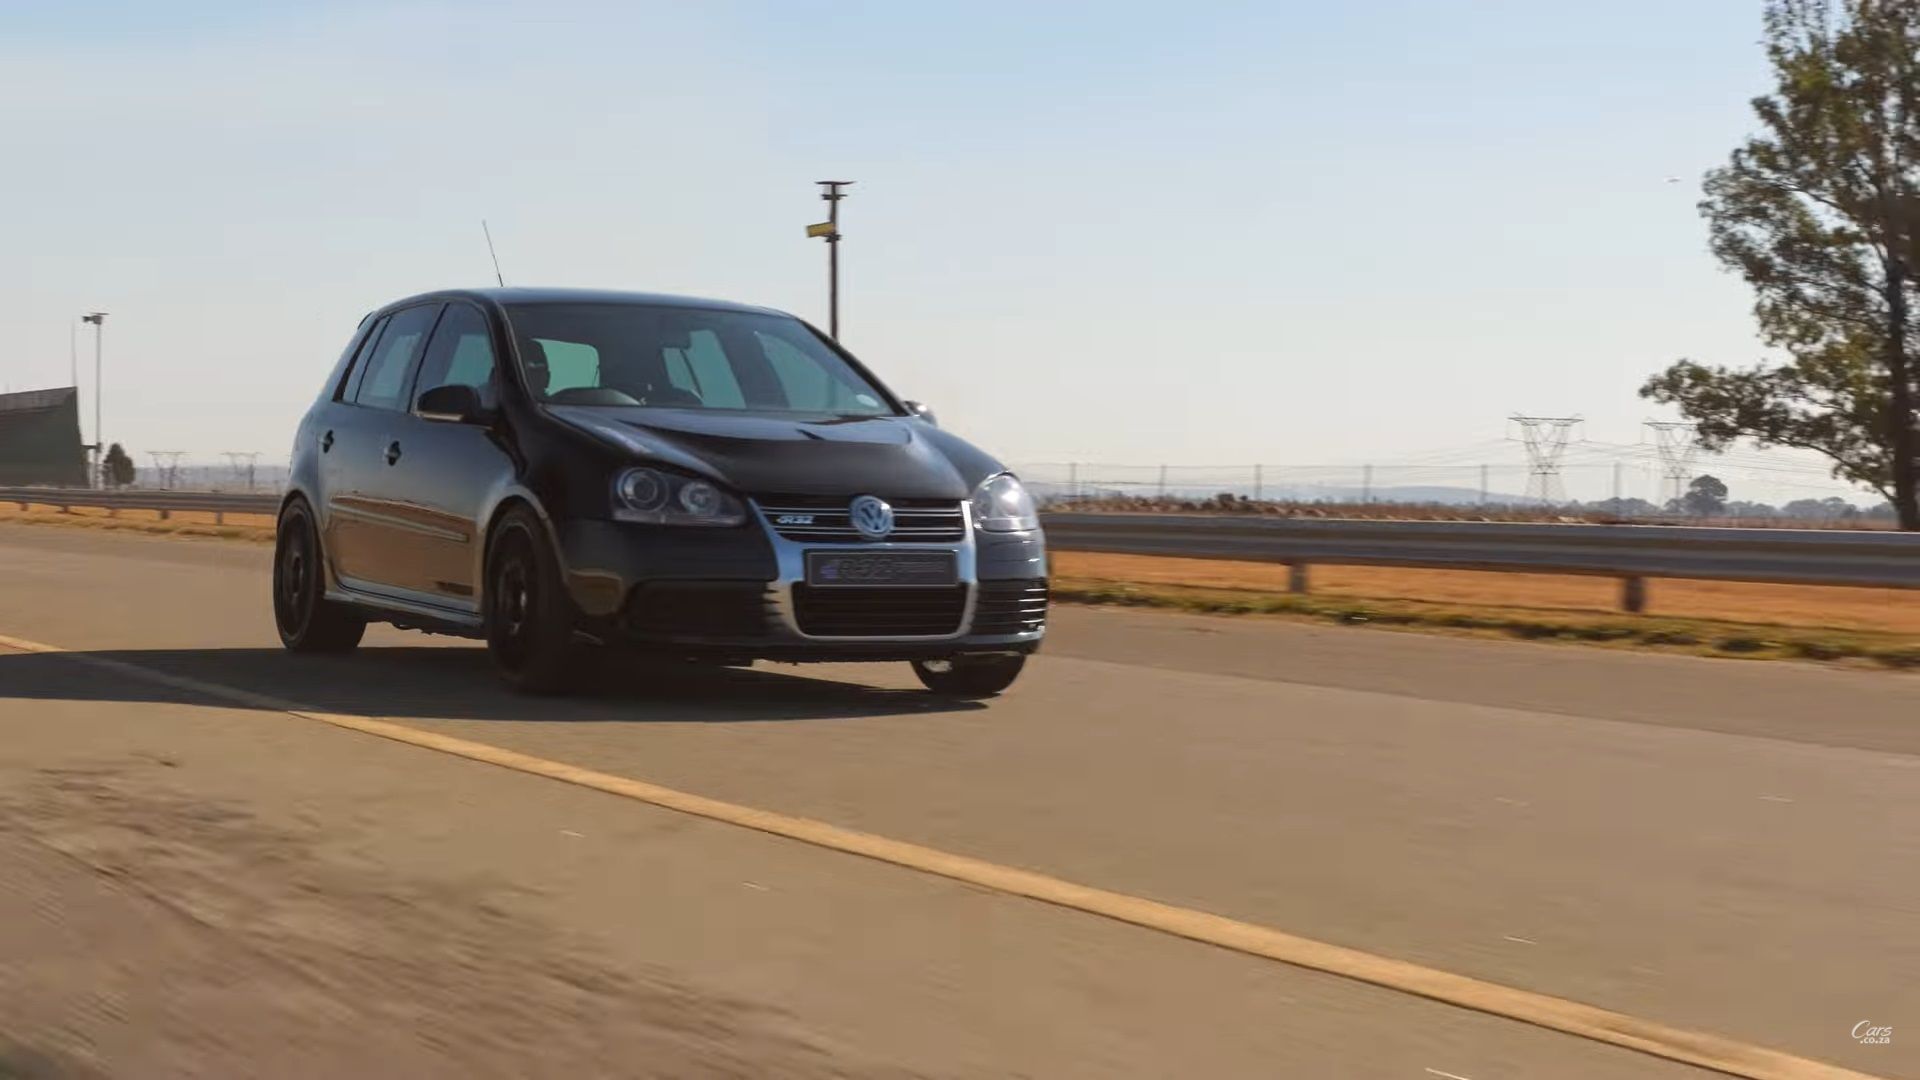 This 1,000 HP VW Golf R32 Is The Perfect Daily Driver